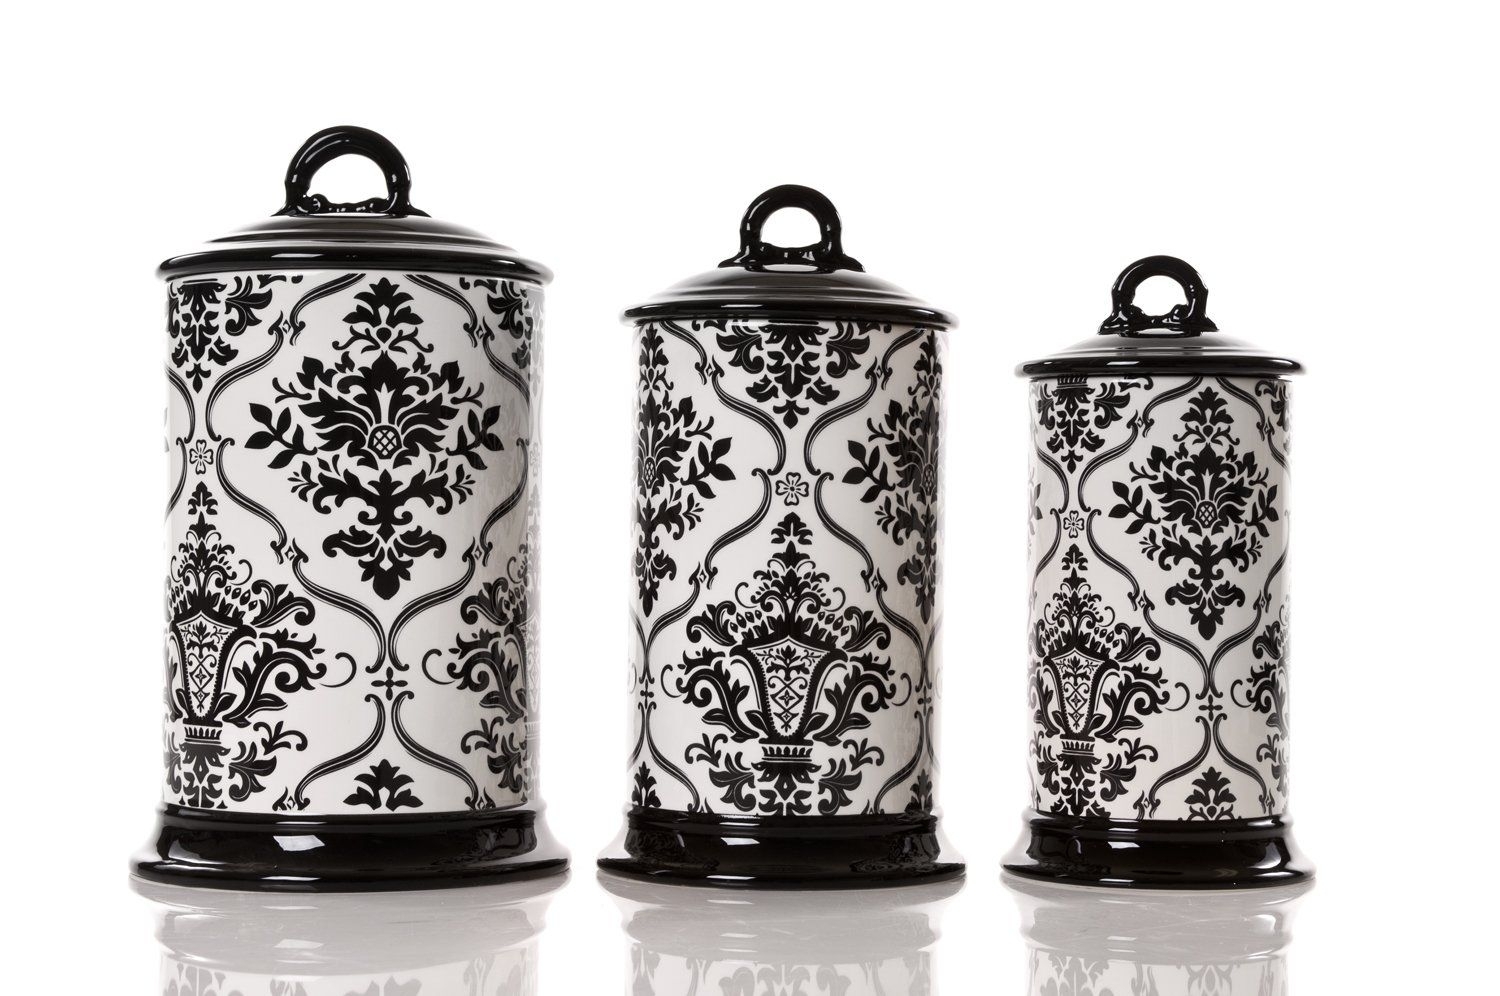 canisters for kitchen grapes design